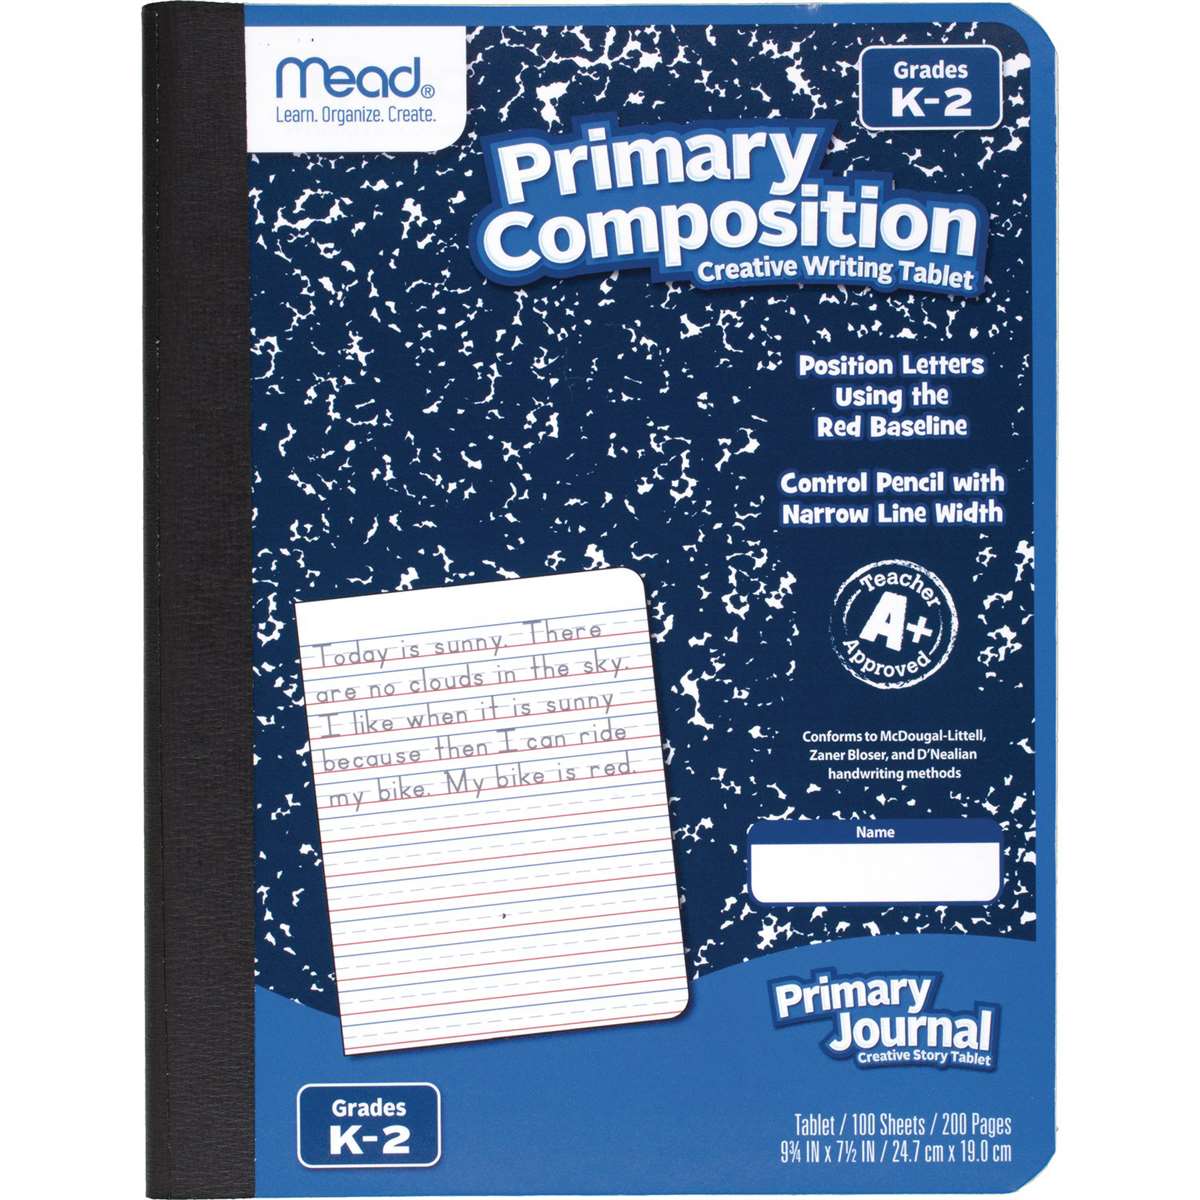 Mead Multi-Purpose Typing Paper 100 Sheets, Set of 6 Packs